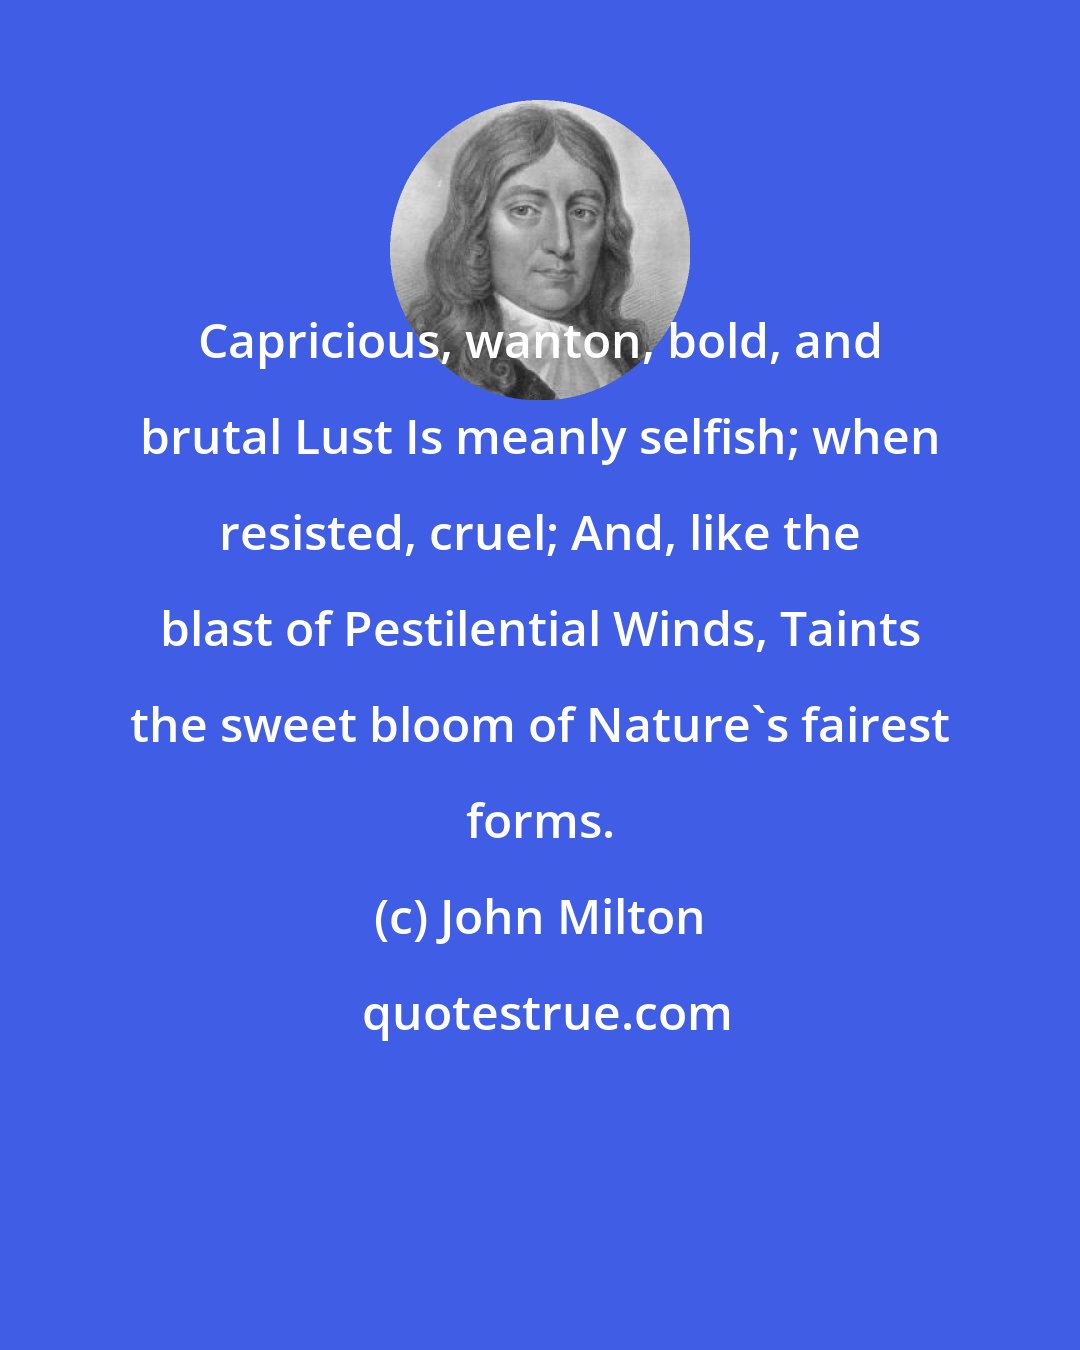 John Milton: Capricious, wanton, bold, and brutal Lust Is meanly selfish; when resisted, cruel; And, like the blast of Pestilential Winds, Taints the sweet bloom of Nature's fairest forms.